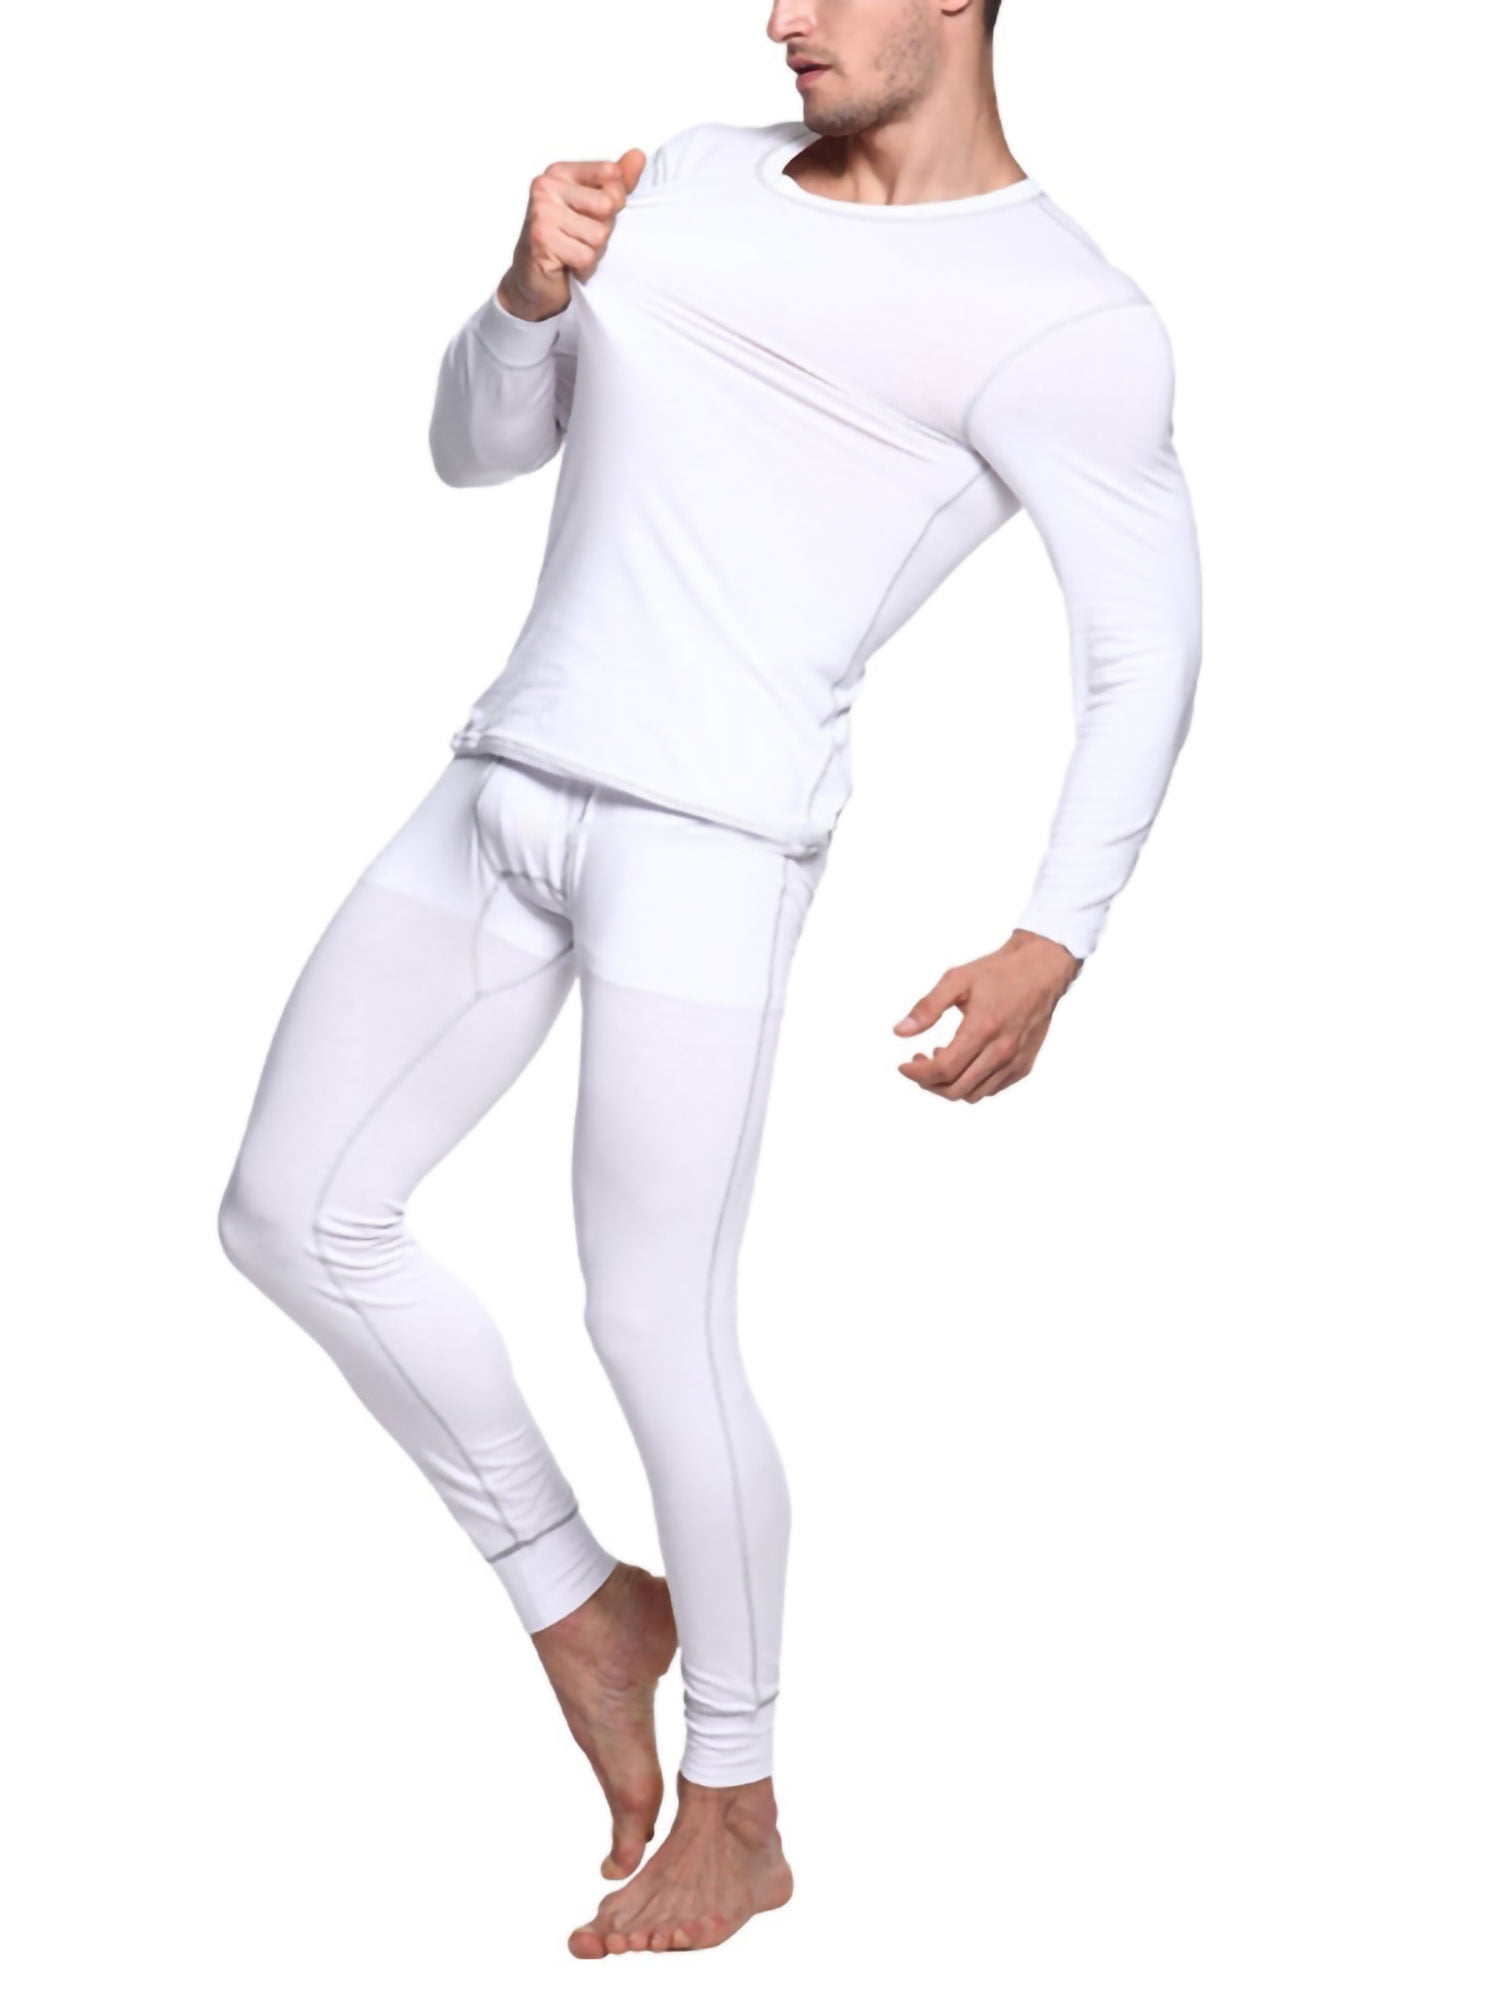 Moet Fashion Mens Ultra Soft Thermal Underwear Long Johns Set with Fleece Lined